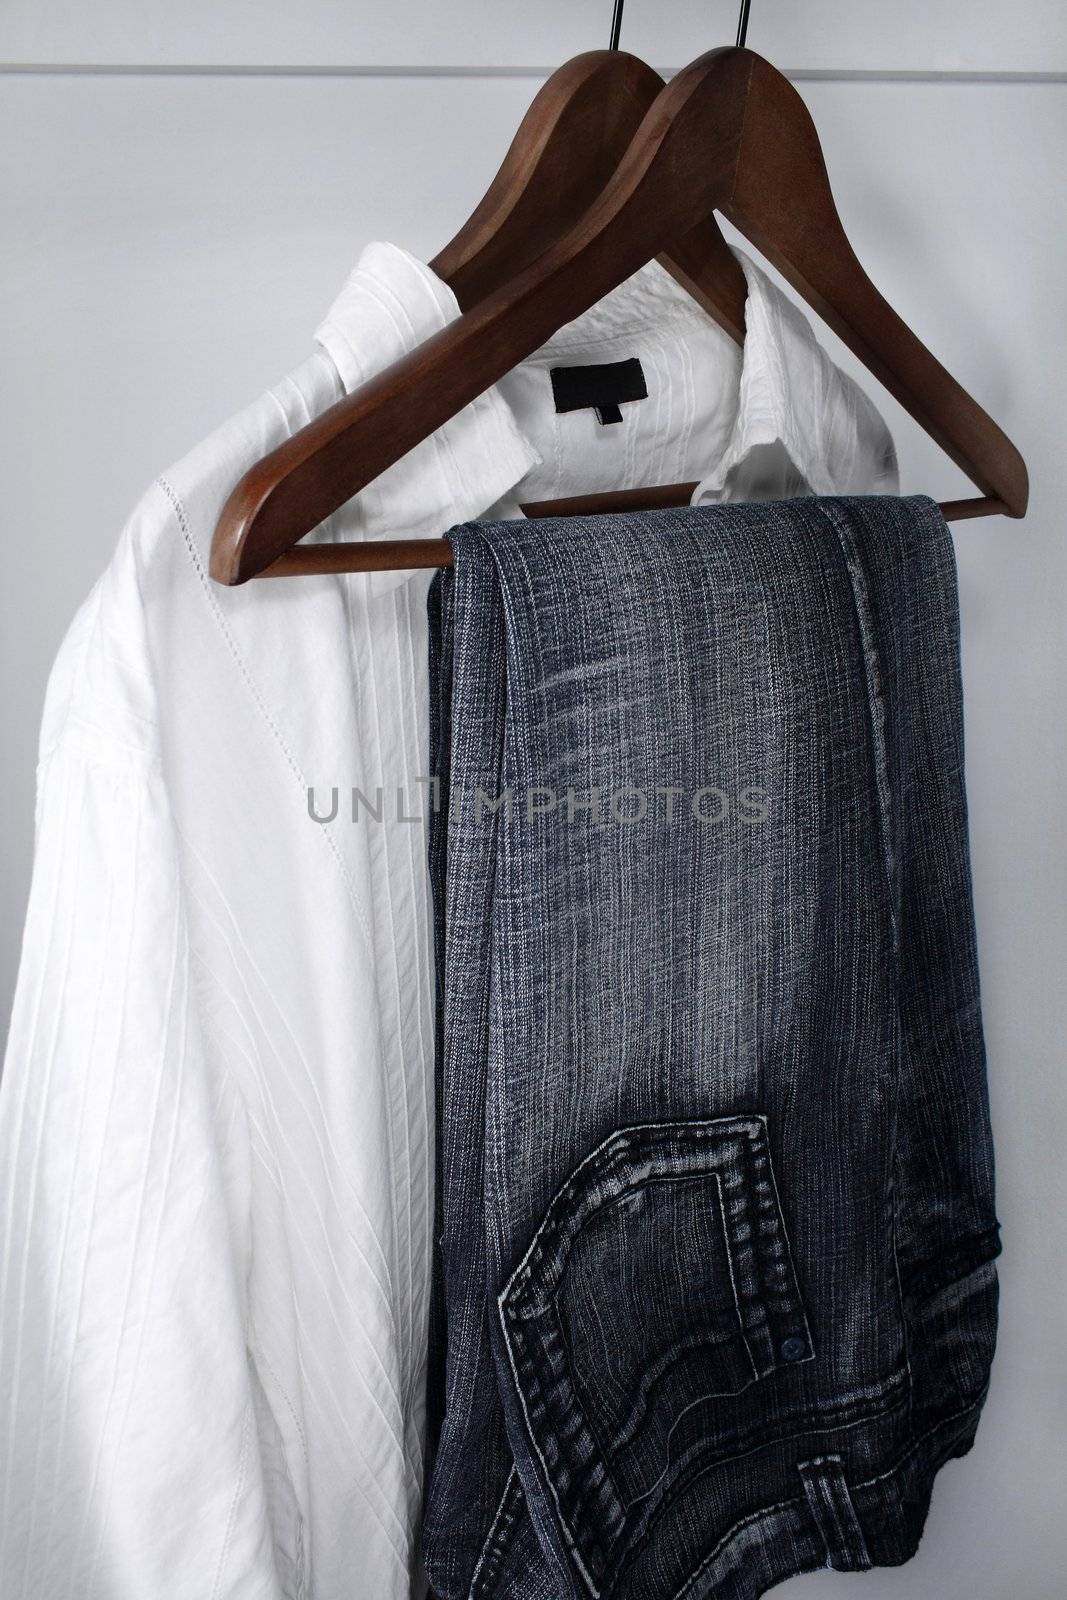 Man's clothing - blue jeans and white shirt by anikasalsera